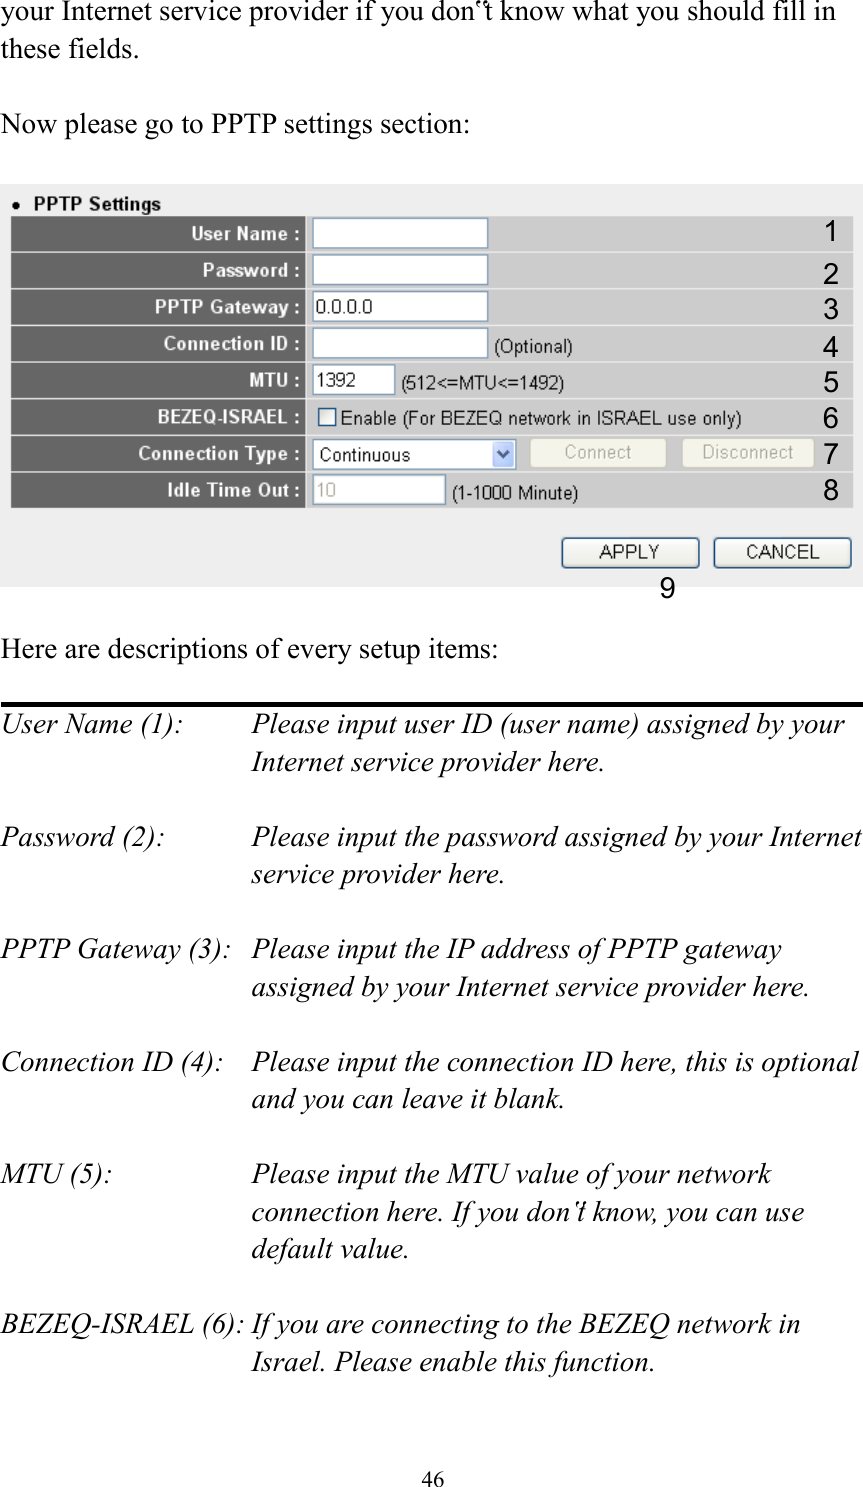  46 your Internet service provider if you don‟t know what you should fill in these fields.  Now please go to PPTP settings section:    Here are descriptions of every setup items:  User Name (1):    Please input user ID (user name) assigned by your Internet service provider here.  Password (2):    Please input the password assigned by your Internet service provider here.  PPTP Gateway (3):   Please input the IP address of PPTP gateway assigned by your Internet service provider here.  Connection ID (4):    Please input the connection ID here, this is optional and you can leave it blank.  MTU (5):    Please input the MTU value of your network connection here. If you don‟t know, you can use default value.  BEZEQ-ISRAEL (6): If you are connecting to the BEZEQ network in Israel. Please enable this function.  1 2 3 4 5 7 8 9 6 